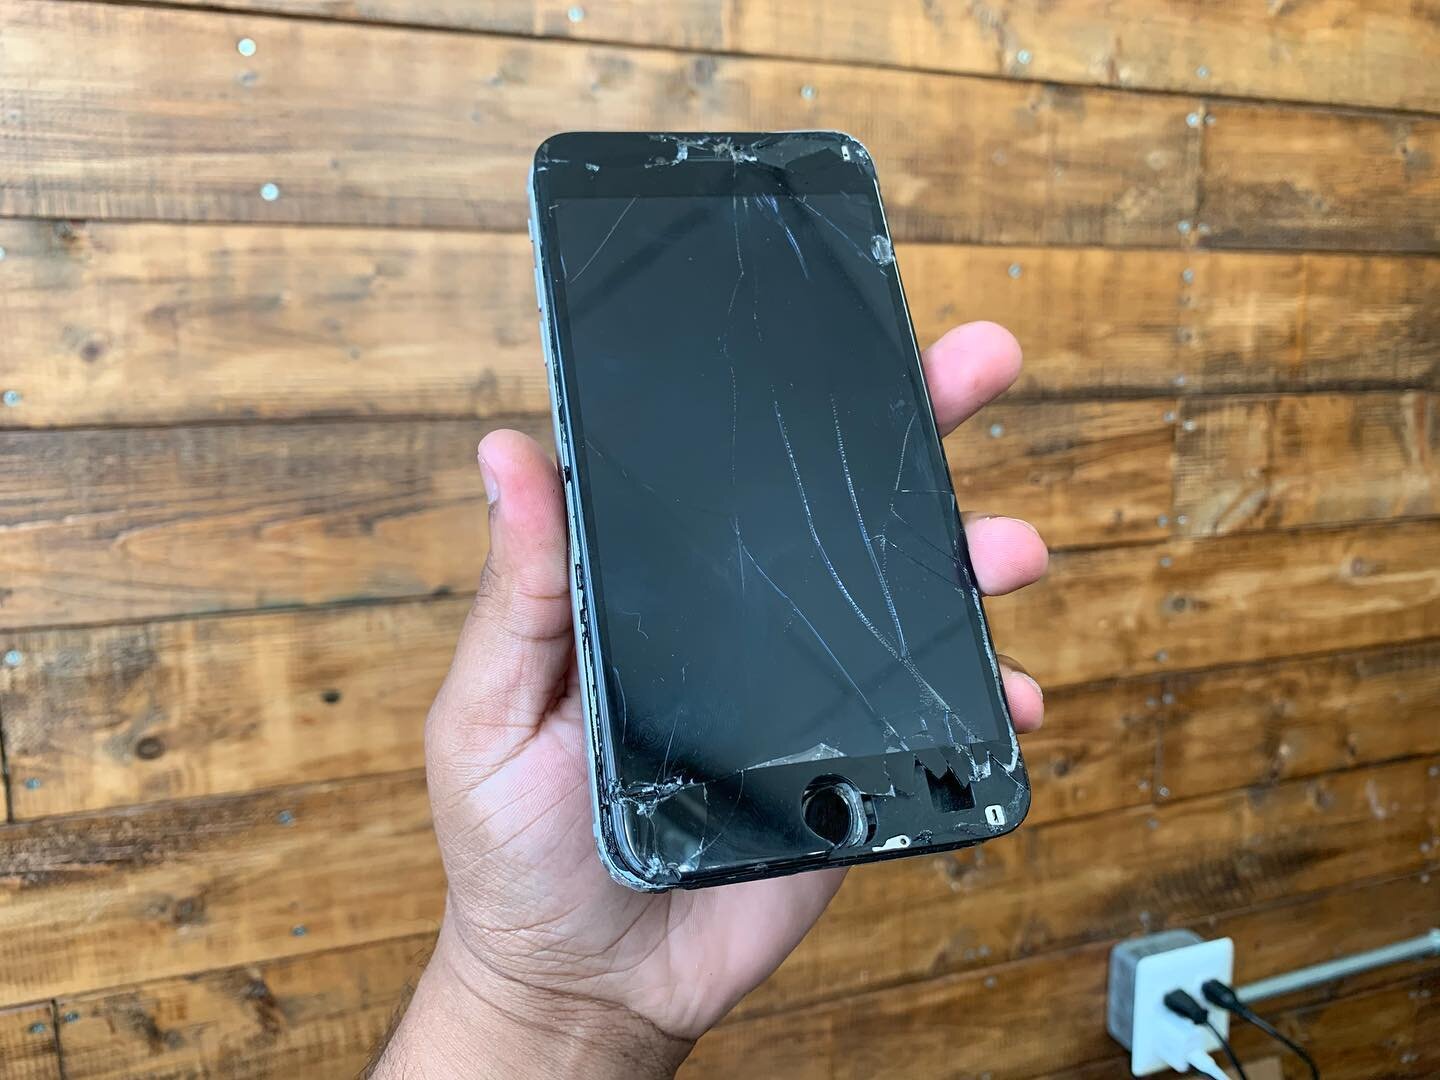 iPhone 6S+ Repair for Carlos📲Call, Text, or slide in our DMs to schedule an appointment. You have our permission.⭐️⭐️⭐️⭐️⭐️⠀⠀⠀⠀⠀⠀⠀⠀⠀⠀⠀⠀⠀⠀⠀⠀⠀⠀ ⠀⠀⠀⠀⠀⠀⠀⠀⠀⠀⠀⠀⠀⠀⠀⠀⠀⠀
💻 EzekielTech
📲: (845) 857-5760 ⠀⠀⠀⠀⠀⠀⠀⠀⠀⠀⠀⠀⠀⠀⠀⠀⠀⠀⠀⠀ 🌎:www.Ezekiel.tech
🔛Facebook.co